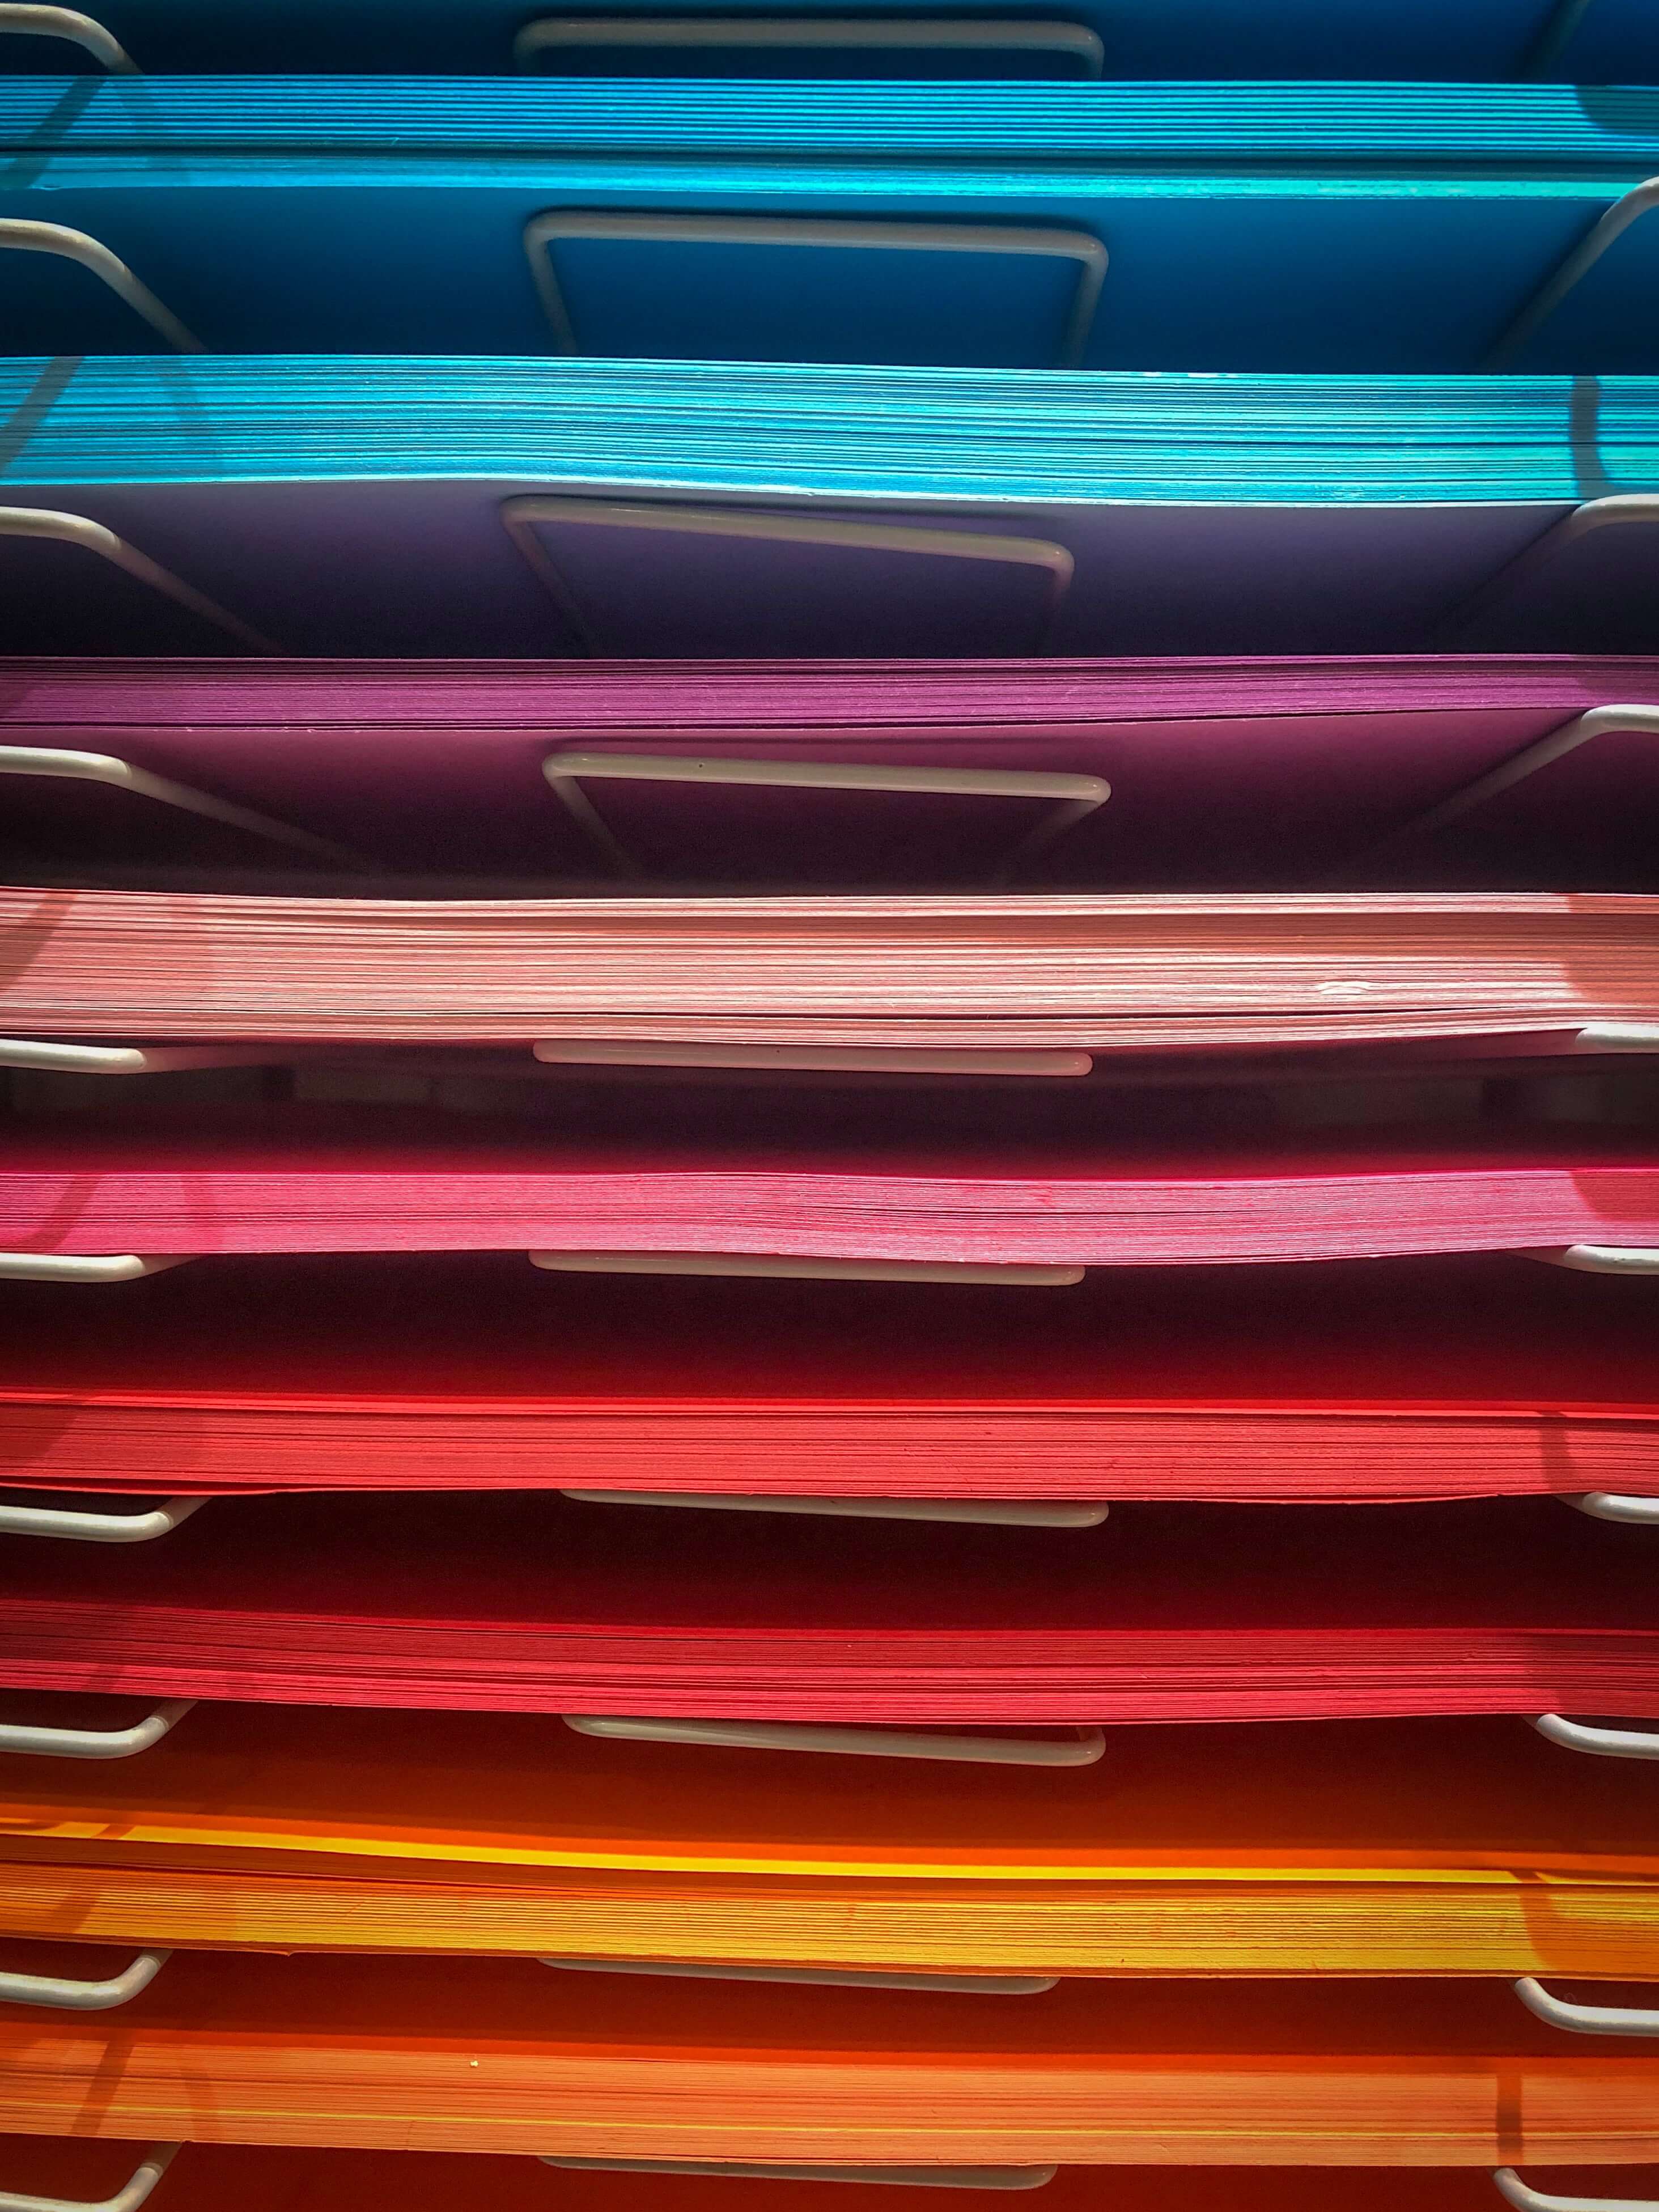 A paper shelf with coloured paper going from blue at the top to orange at the bottom.